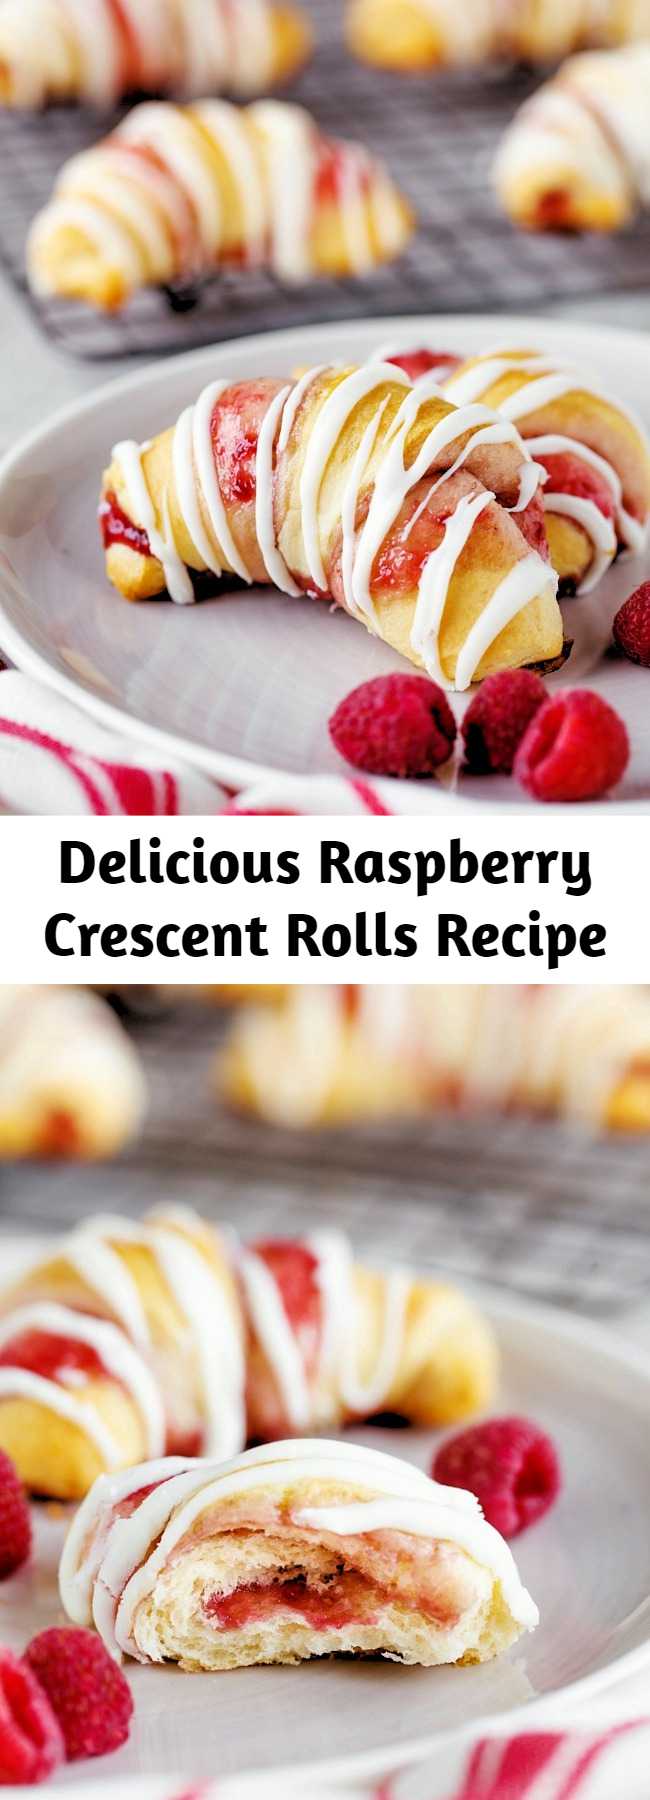 Delicious Raspberry Crescent Rolls Recipe - Raspberry Crescent Rolls: a delicious sweet dessert that is quick to prepare and uses pre-made crescent rolls and delicious raspberry jam. #desserts #sweettreat